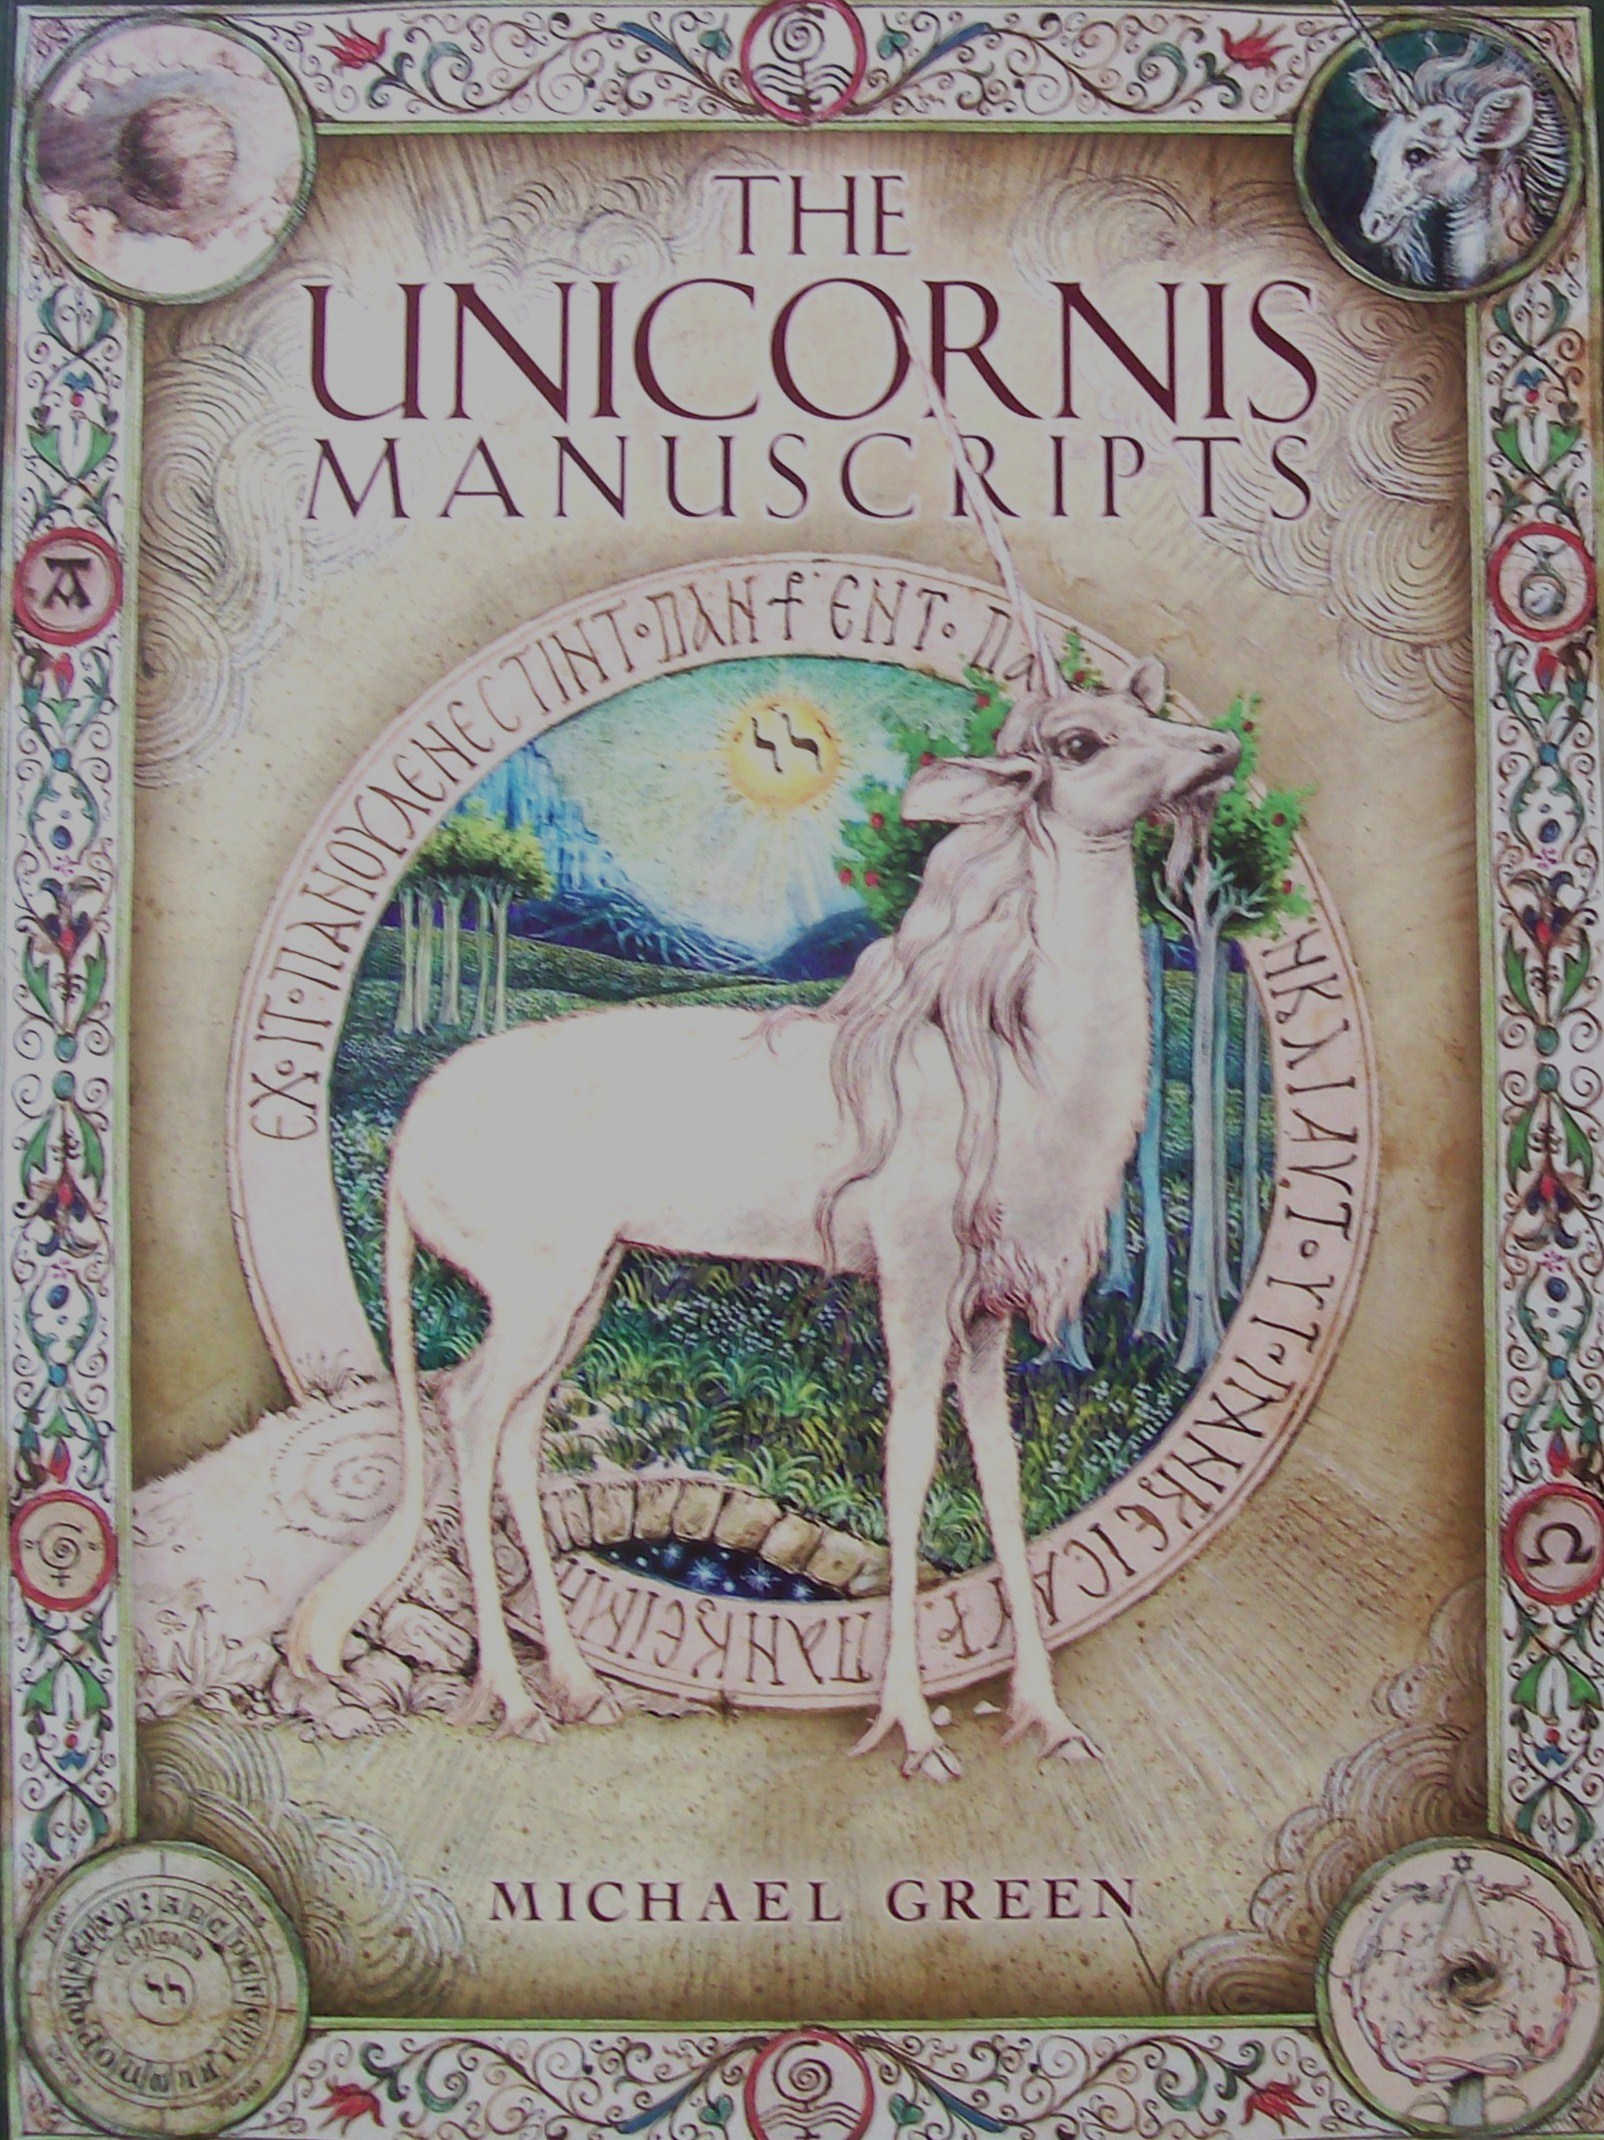 Six Questions with Michael Green: Author of The Unicornis Manuscripts